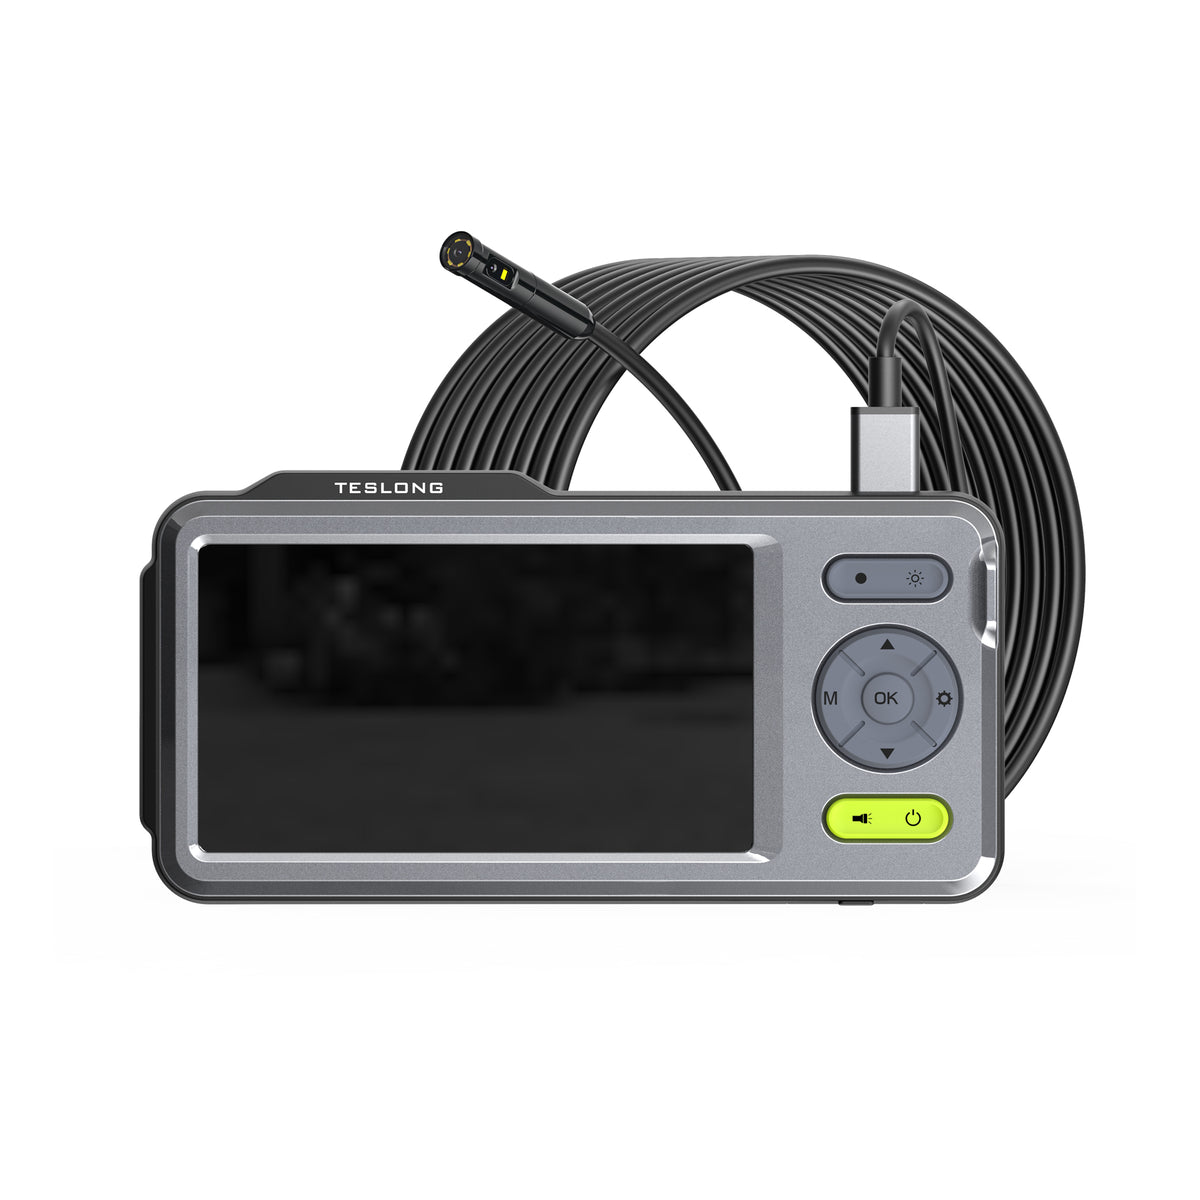 1080P Dual-Lens Endoscope,Borescope with 5 IPS Screen,5mm Ultra-Slim Inspection  Camera with 7 LED Lights,32GB Card,3500mAh Battery,Snake Camera with 16.5ft  Waterproof Cable,Portable Hard Case 